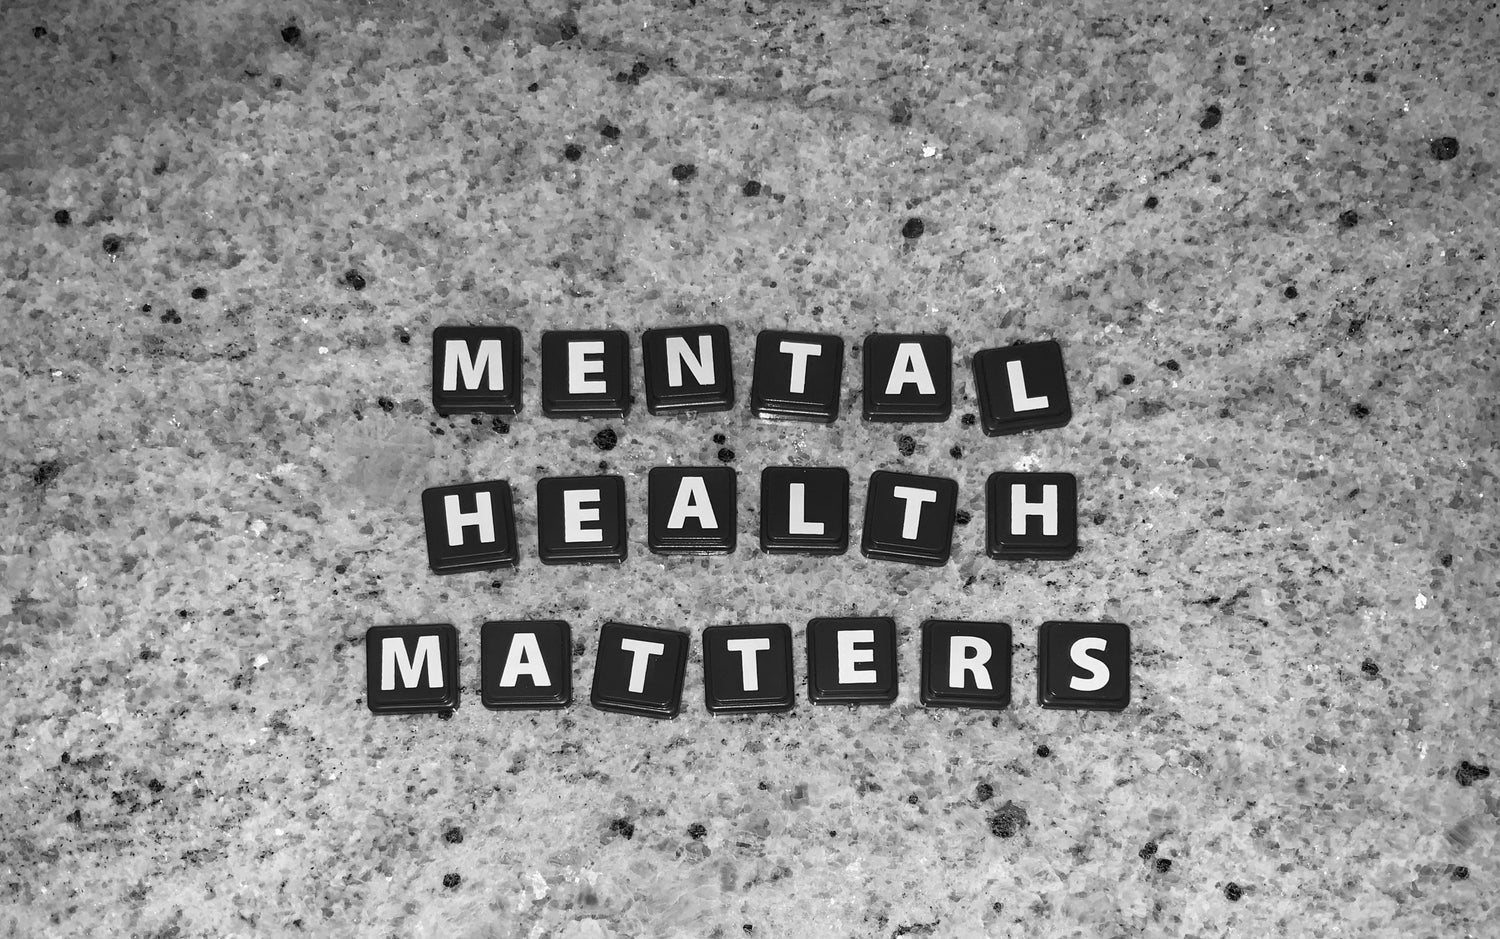 Let’s talk about mental health – World Mental Health Day 2021